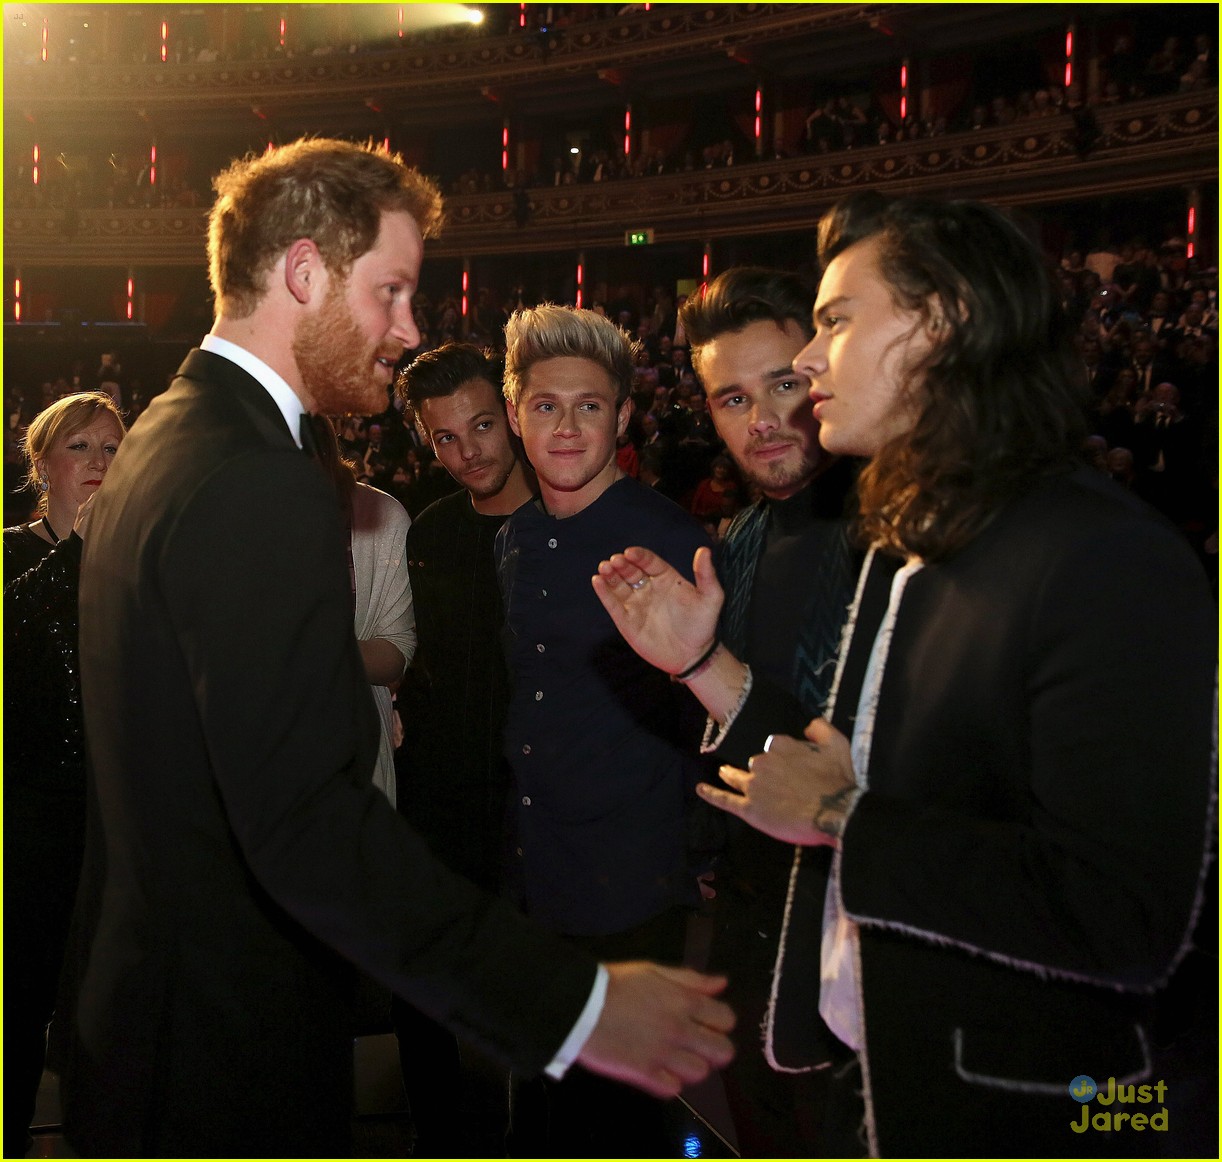 little mix one direction royal variety performance prince harry 03